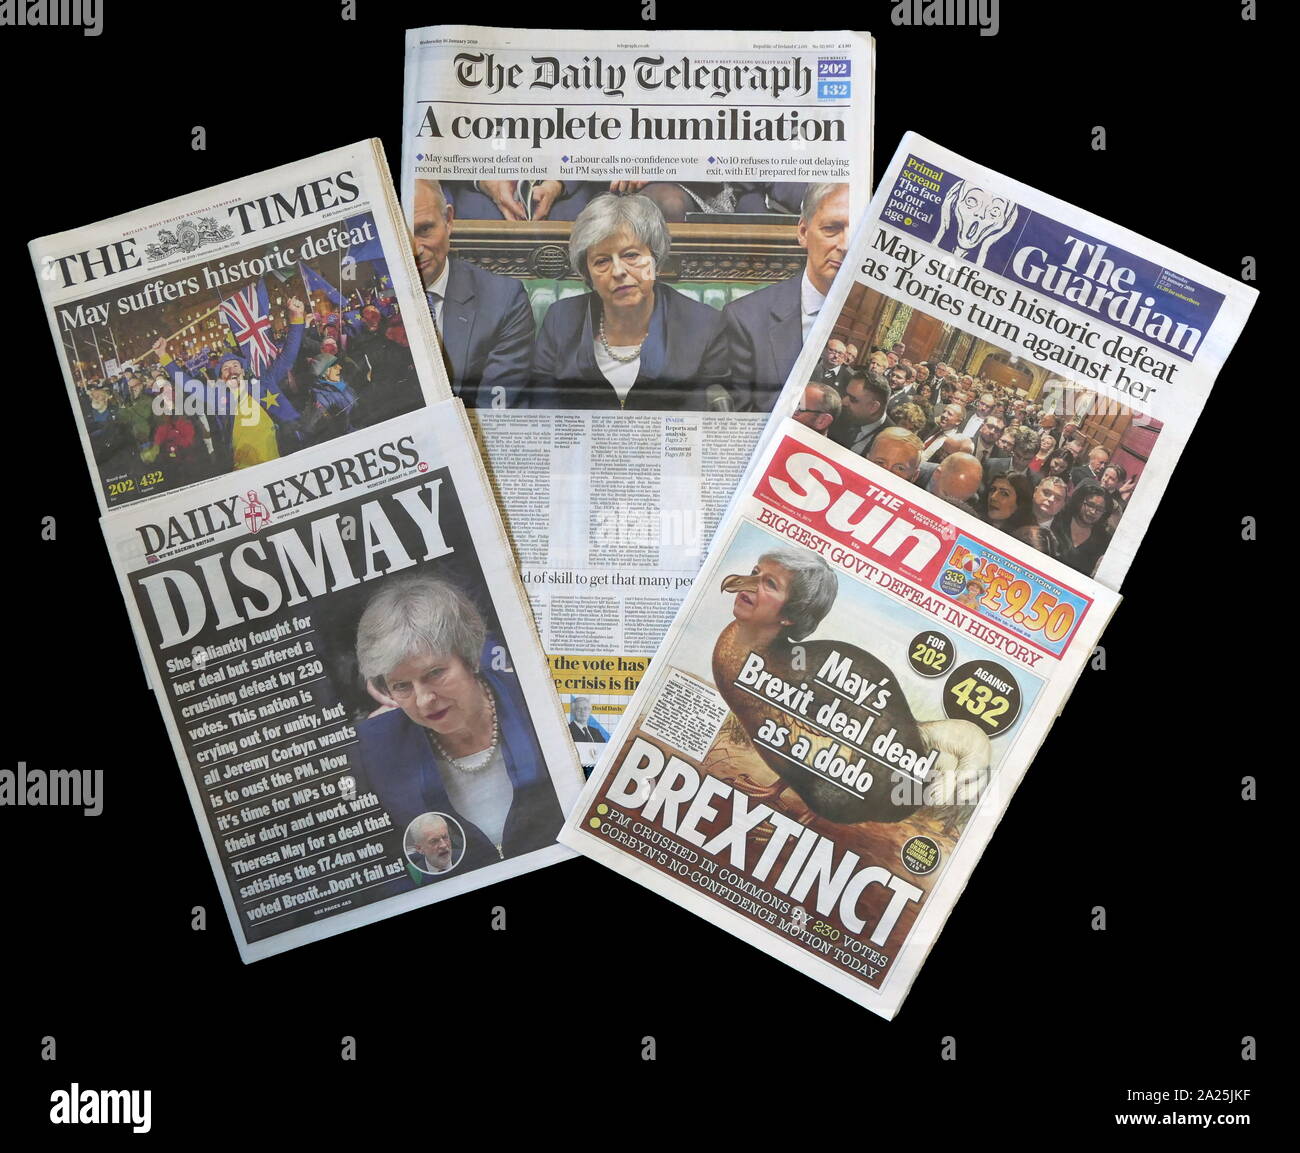 Media front pages in January 2019, reporting on the defeat of Theresa May's Brexit Deal Proposals in Parliament which eventually led to her resignation as Prime Minister and Conservative Party Leader in 2019 Stock Photo